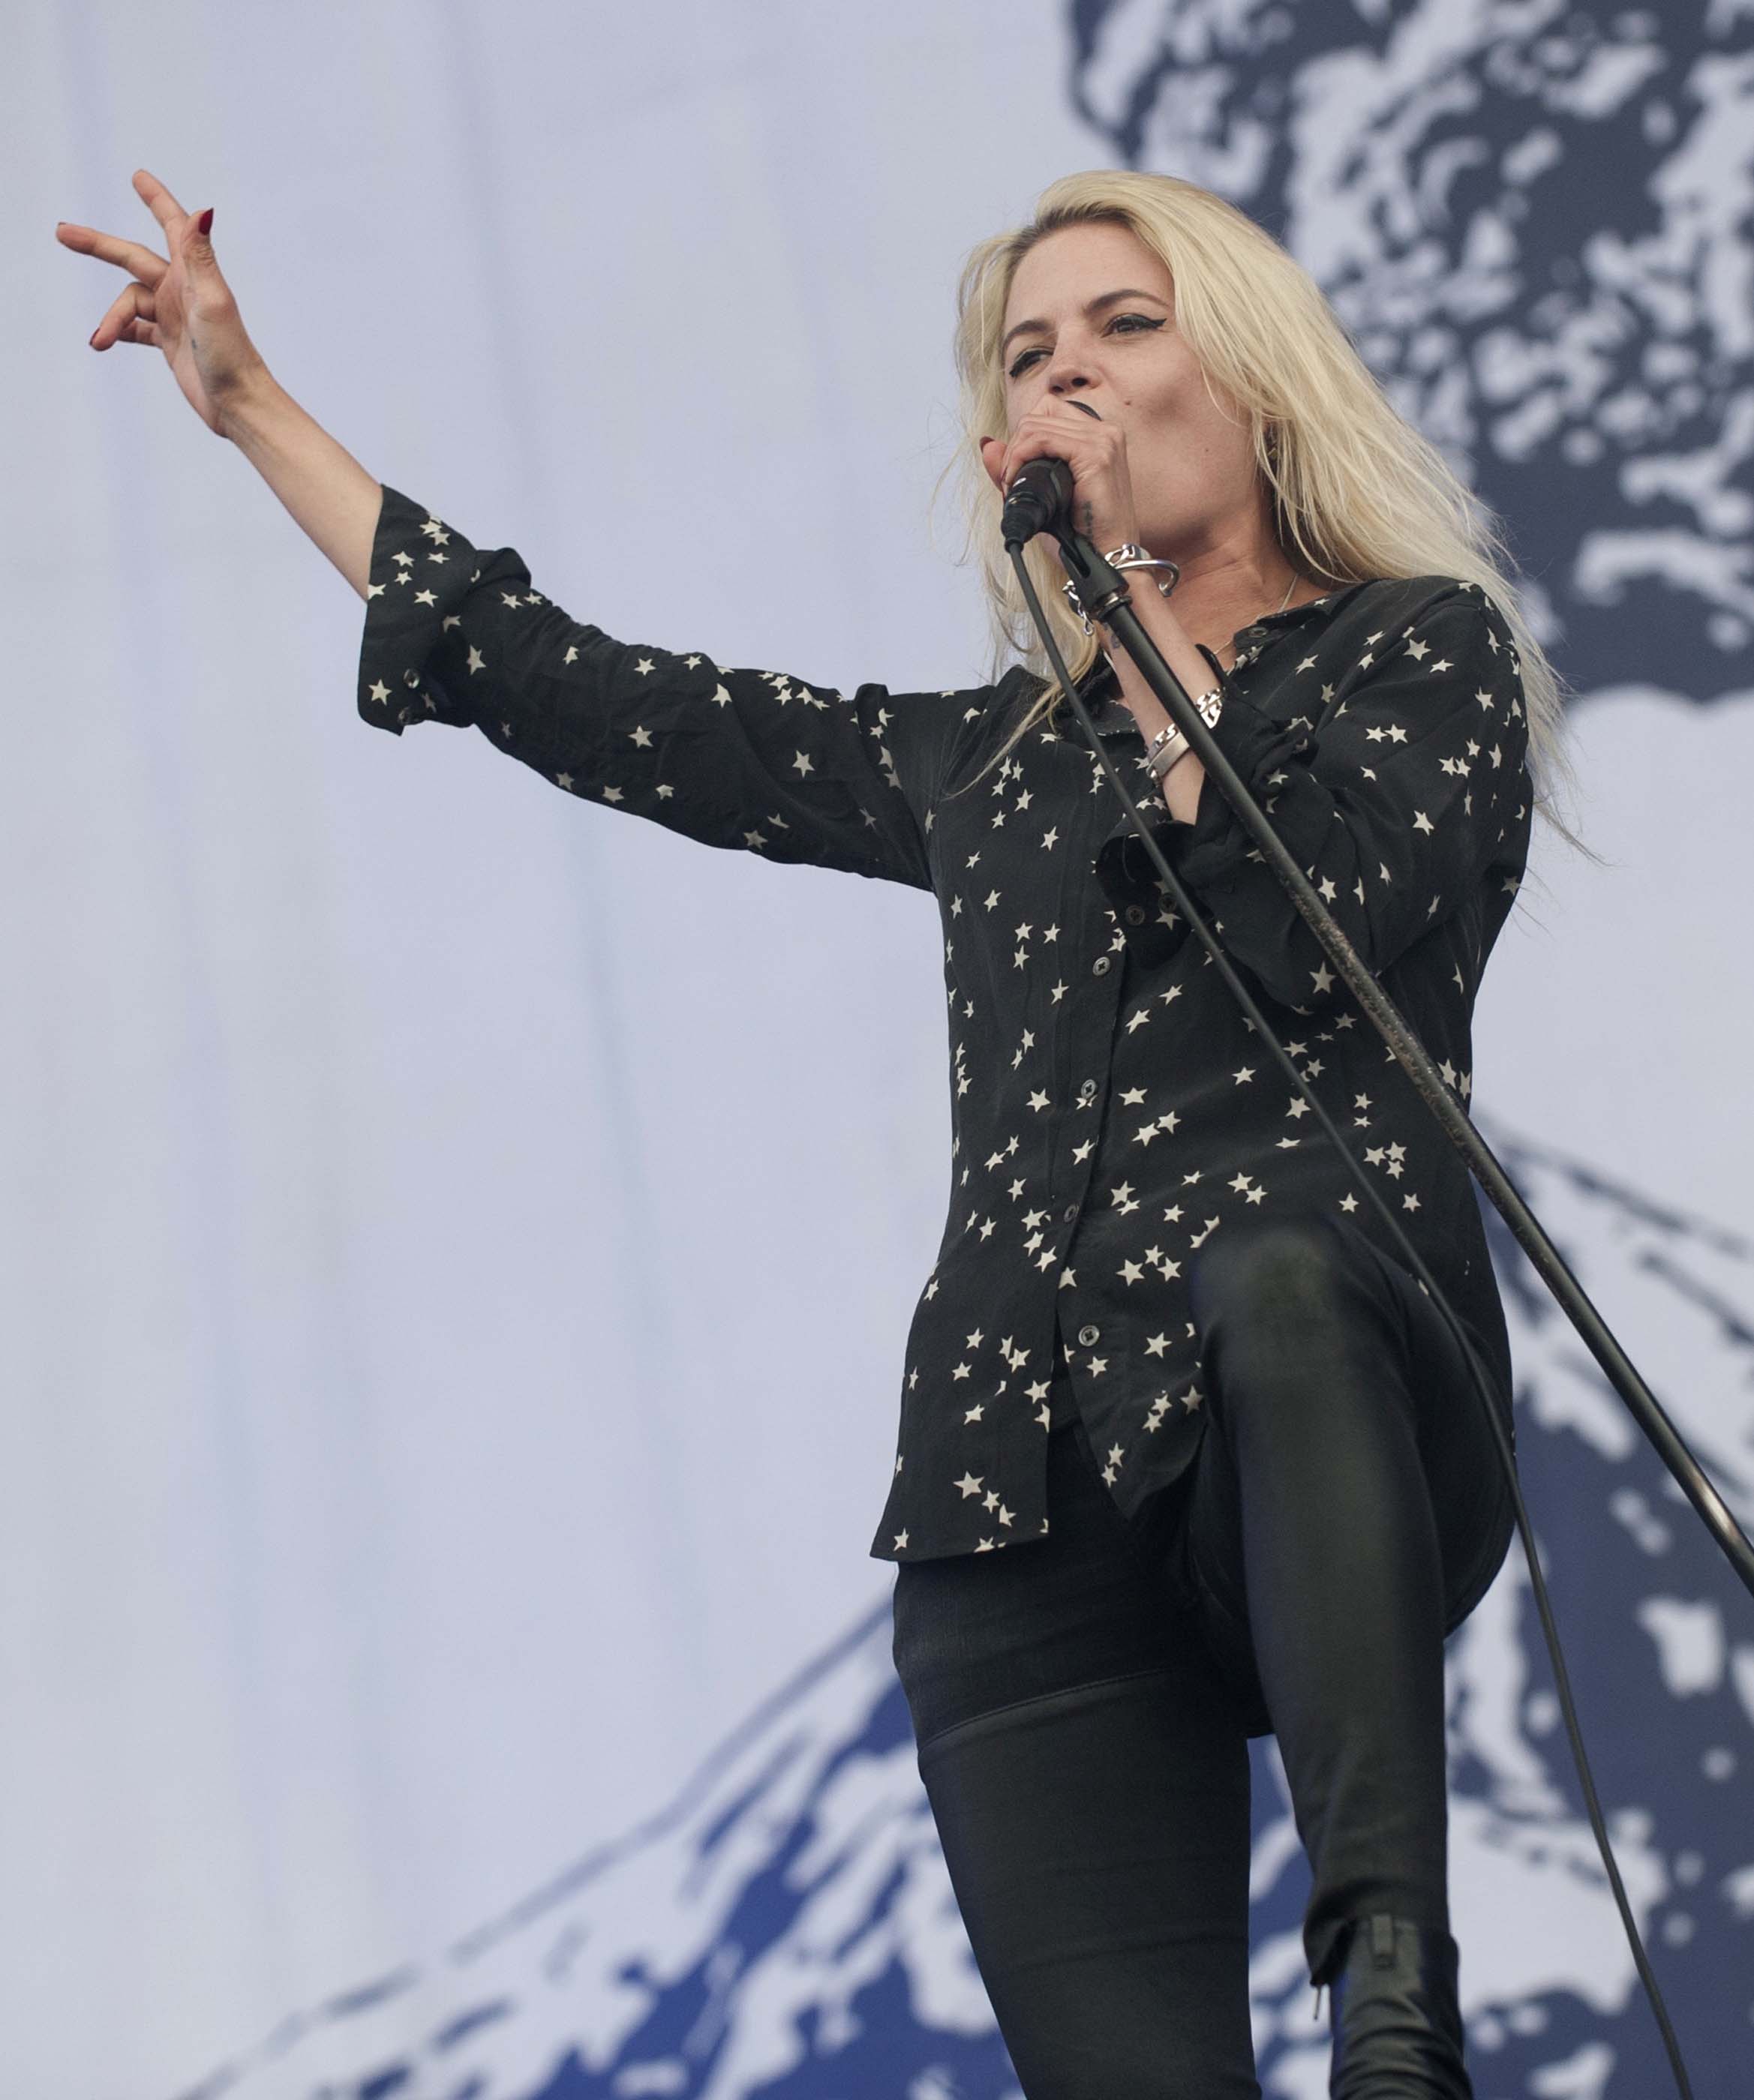 Alison Mosshart performs at the 2016 Park Live international music festival